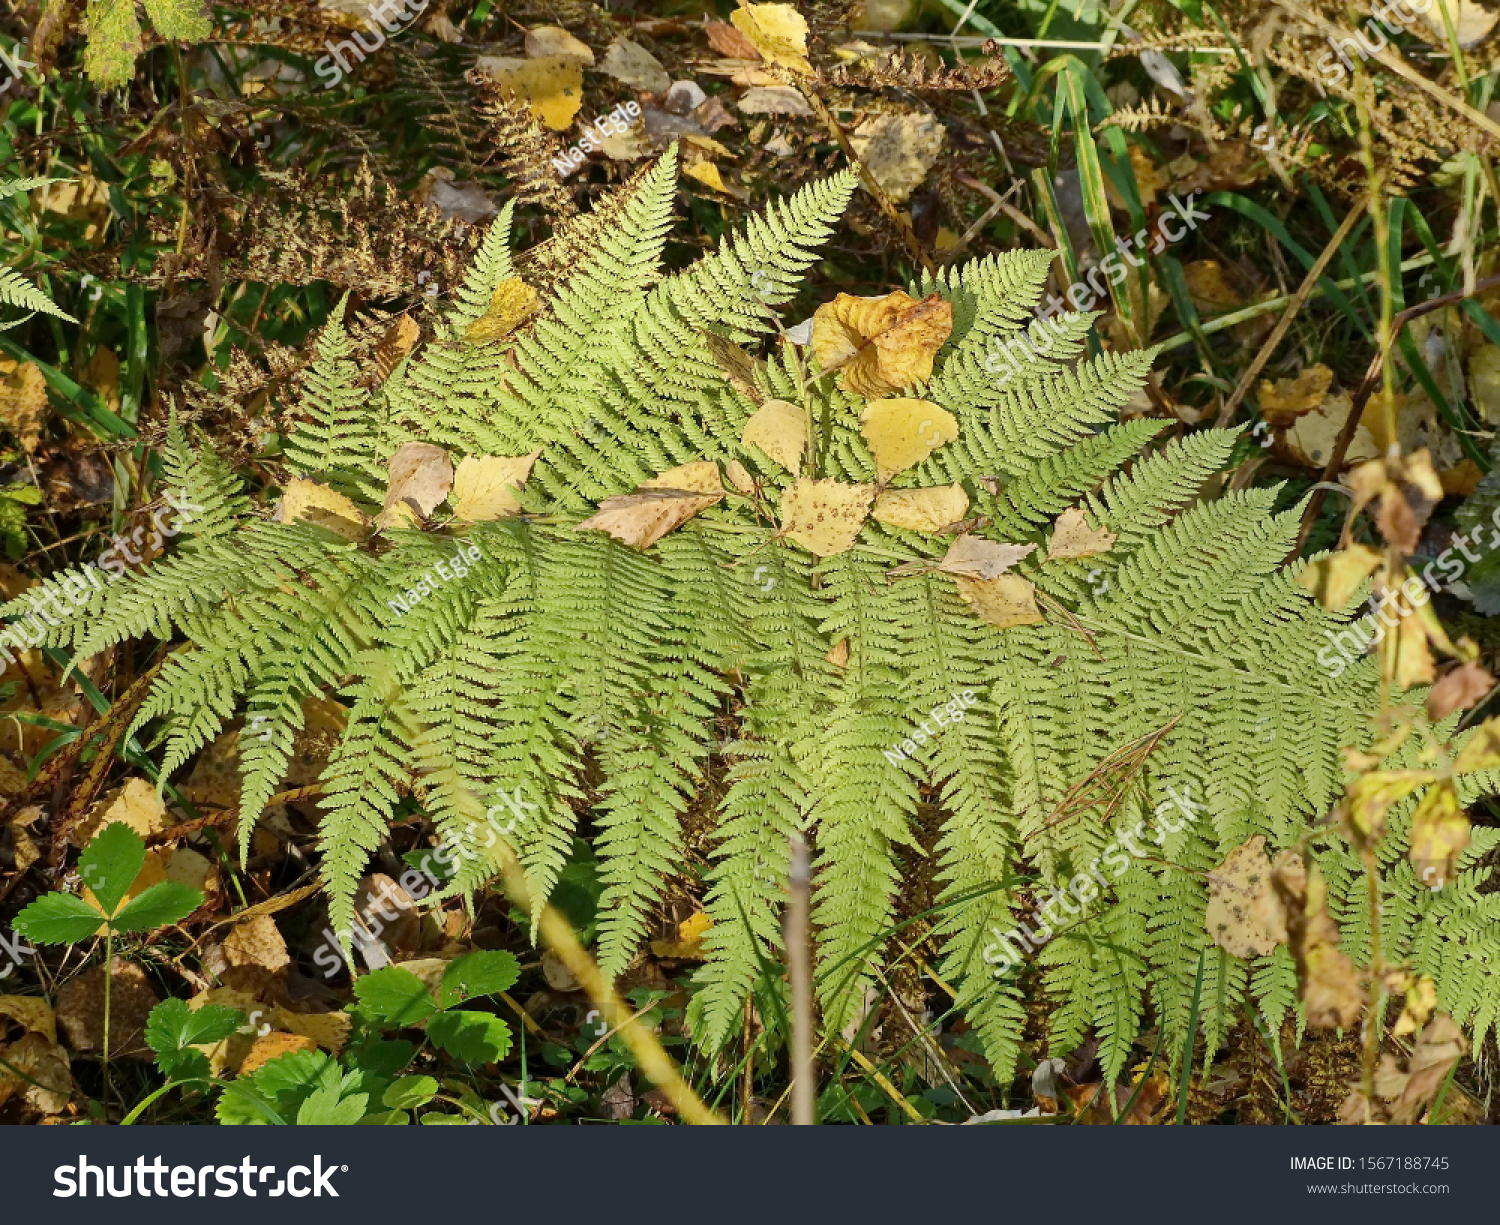 Dryopteris Commonly Called Wood Ferns Species Stock Photo Edit Now 1567188745